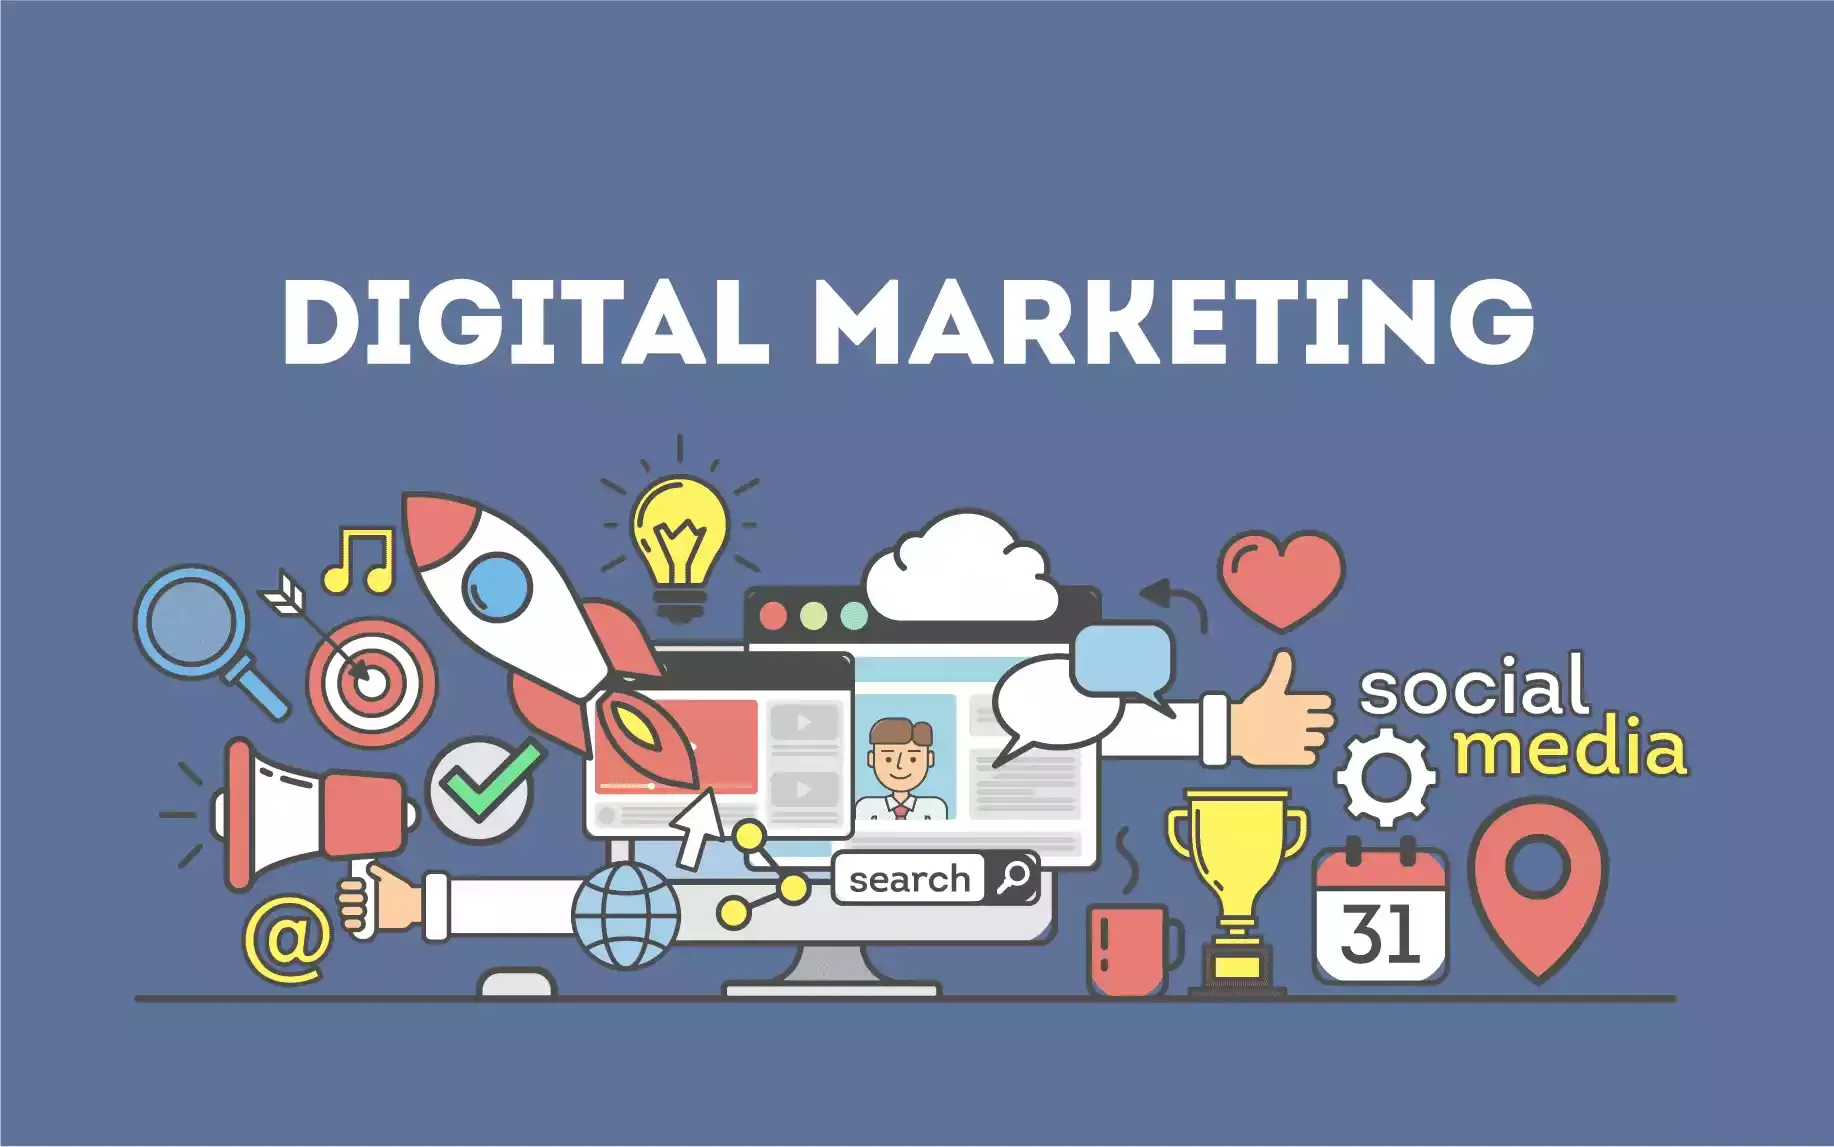 What Skill Do You Need to Be a Digital Marketer